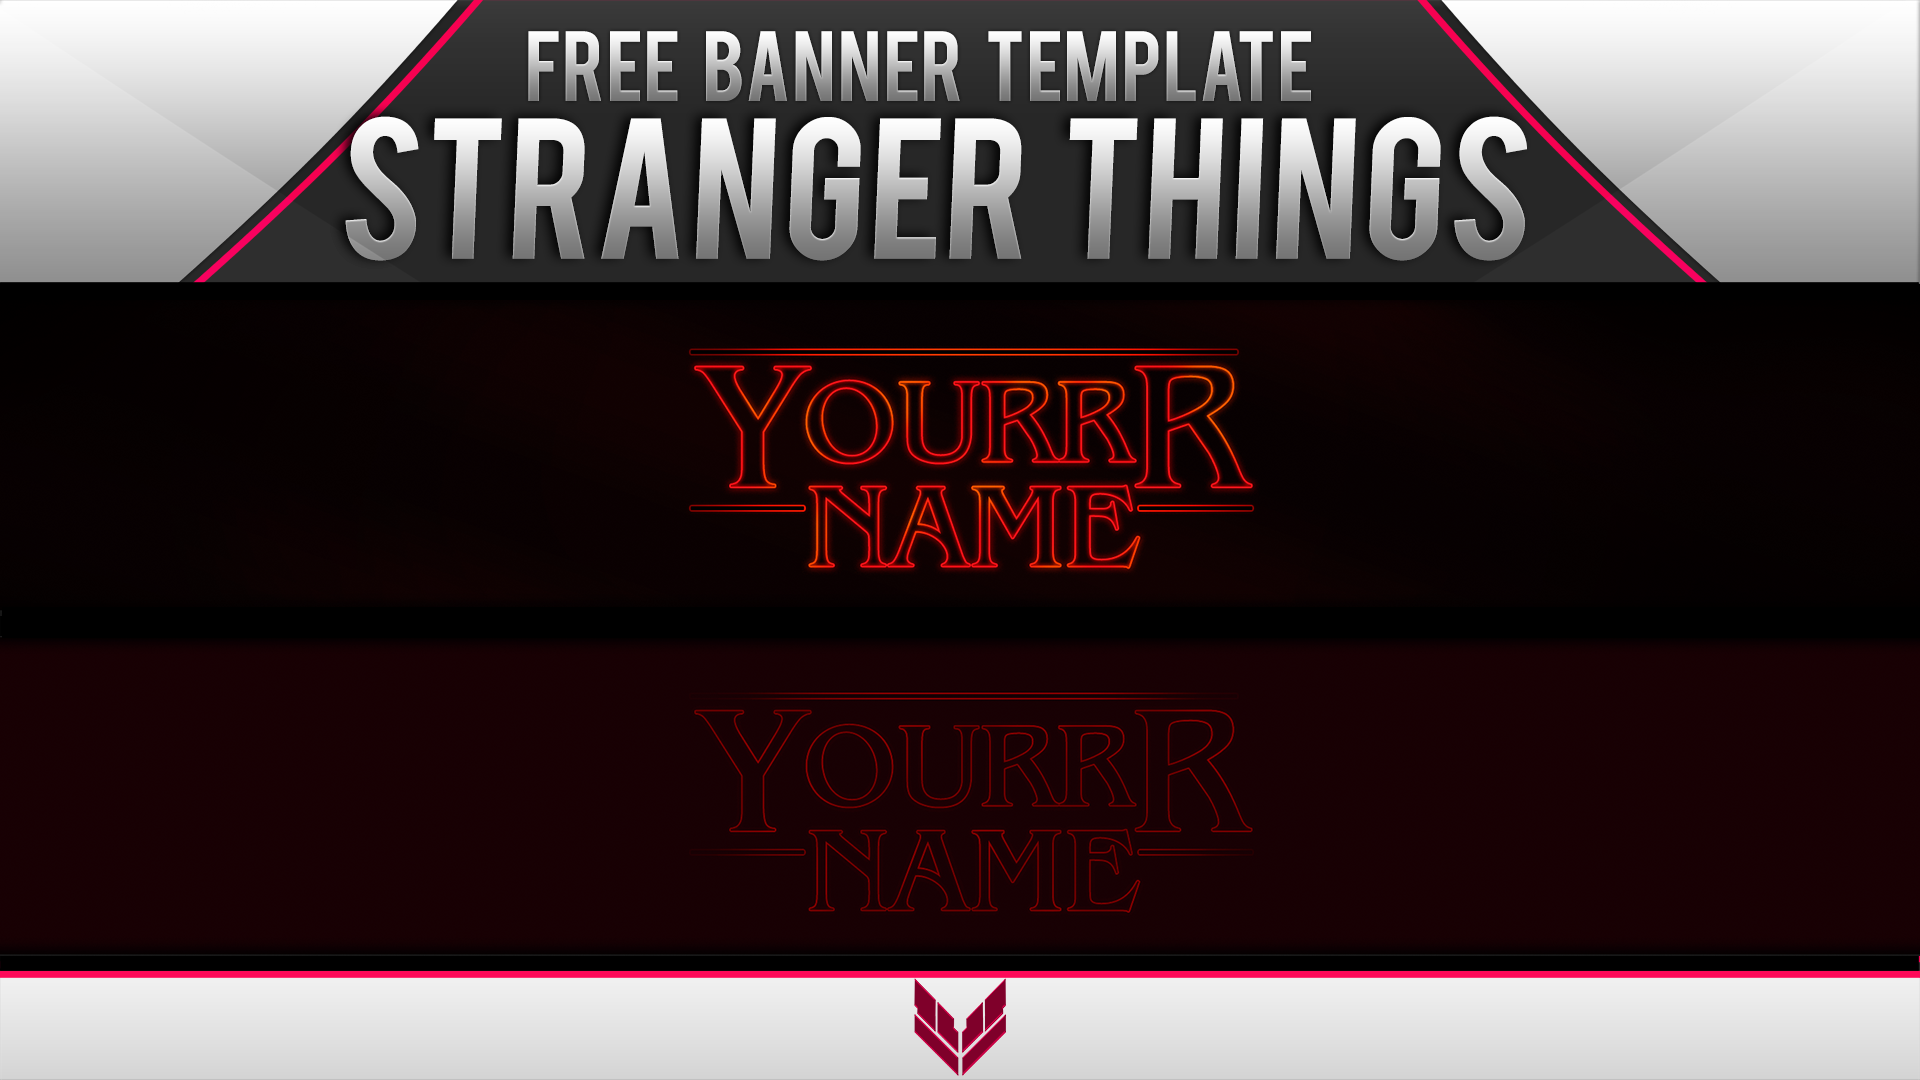 Stranger Things [Free Banner Template]  Preview_by_ayzs-dagknb5